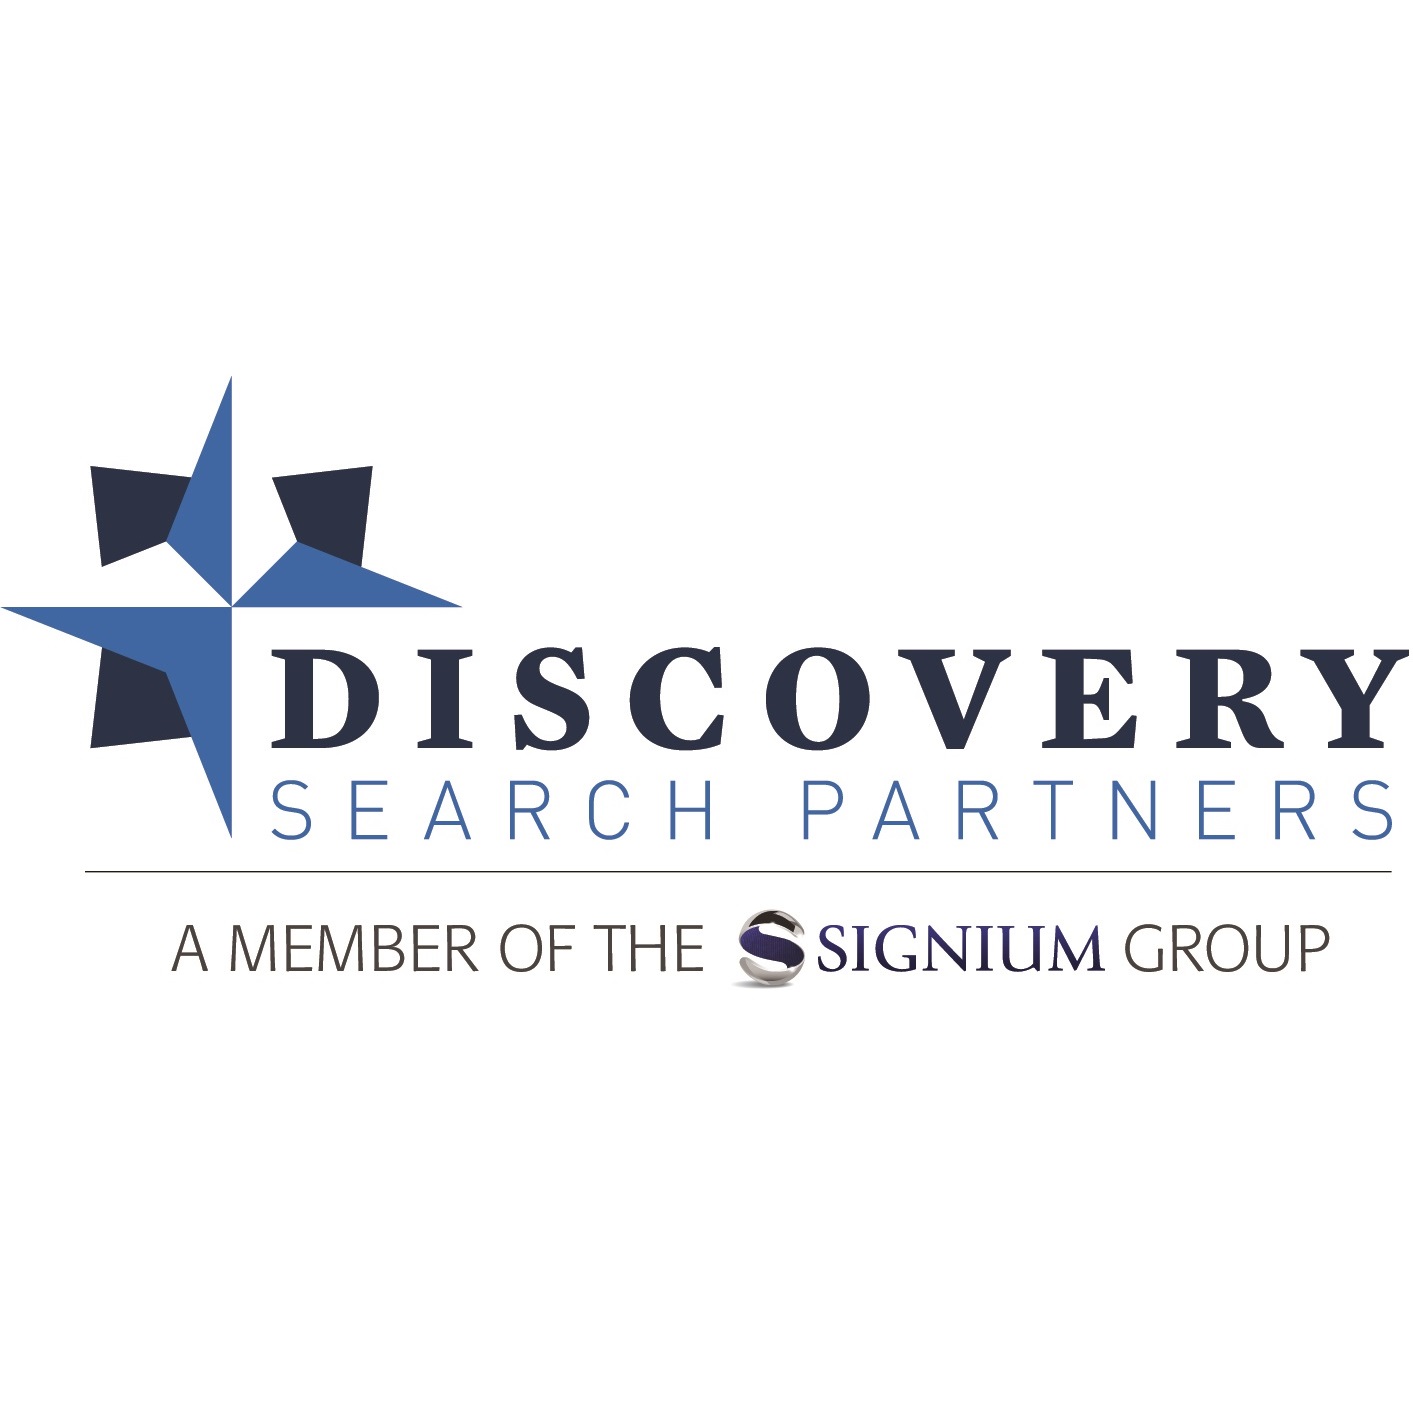 Signium expands in the United States with addition of Discovery Search Partners